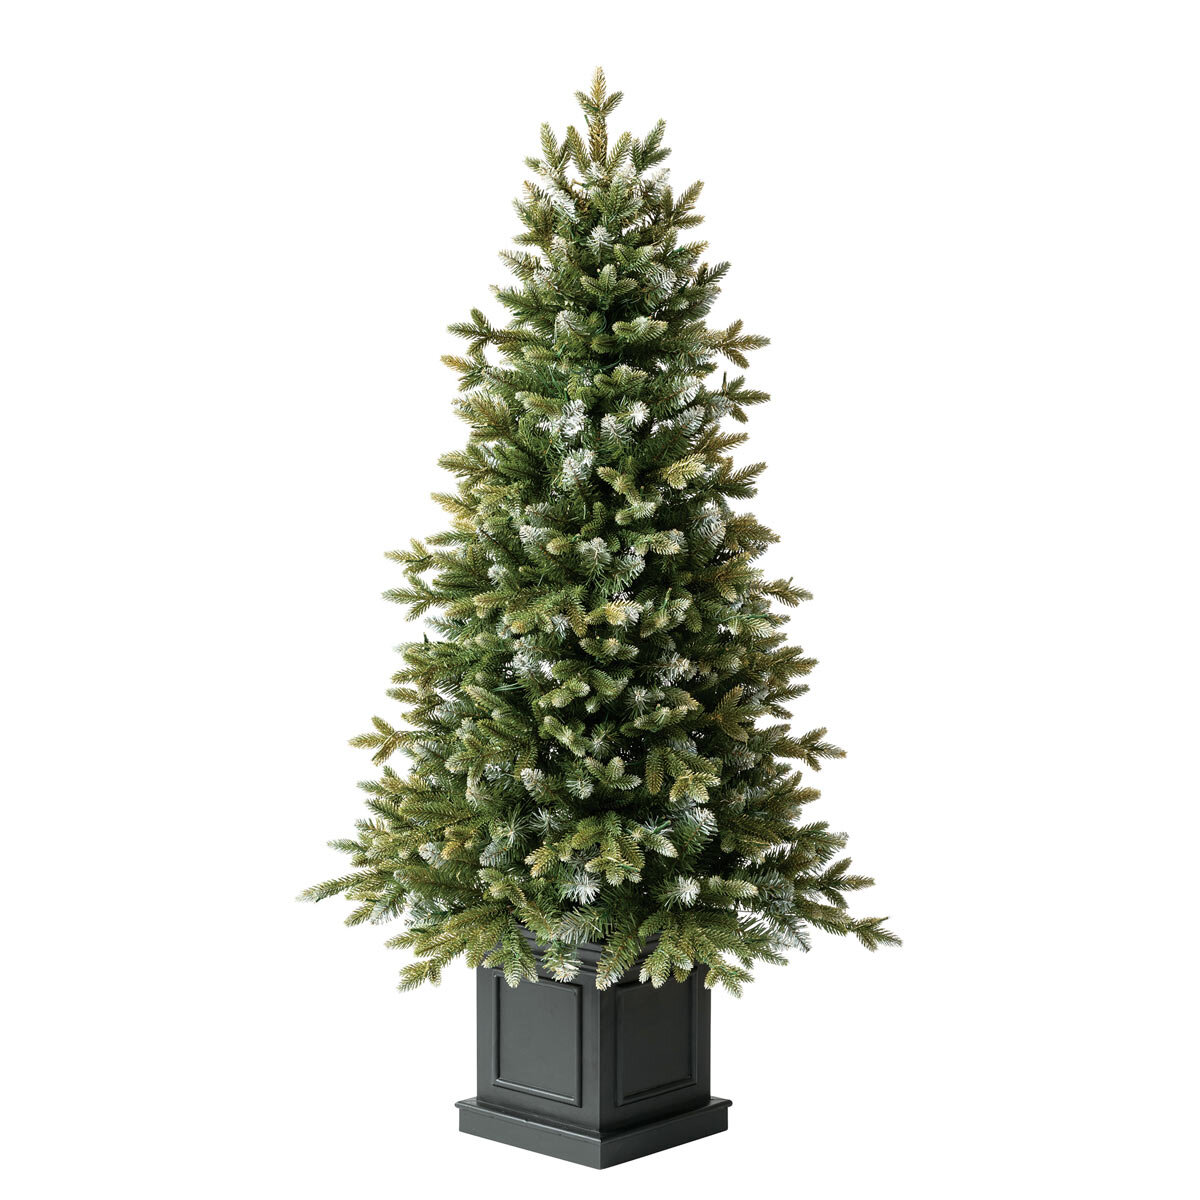 Buy 4.5' Pre-Lit Potted Tree Overview Image at Costco.co.uk